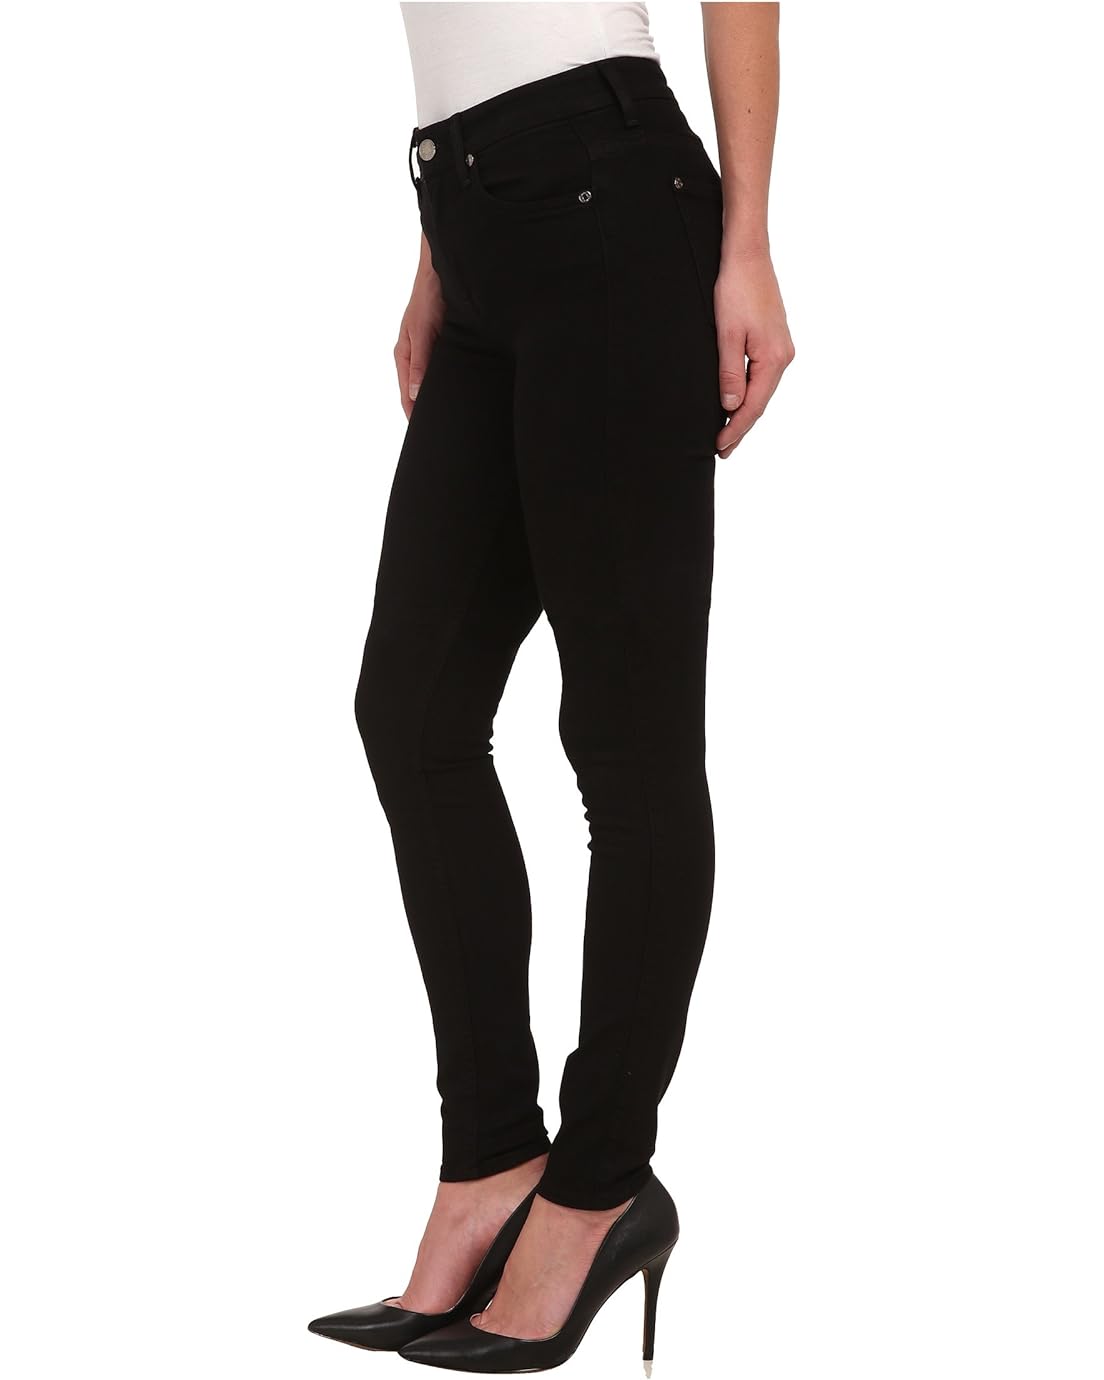  7 For All Mankind The Highwaist Skinny w/ Contour Waistband in Slim Illusion Luxe Black